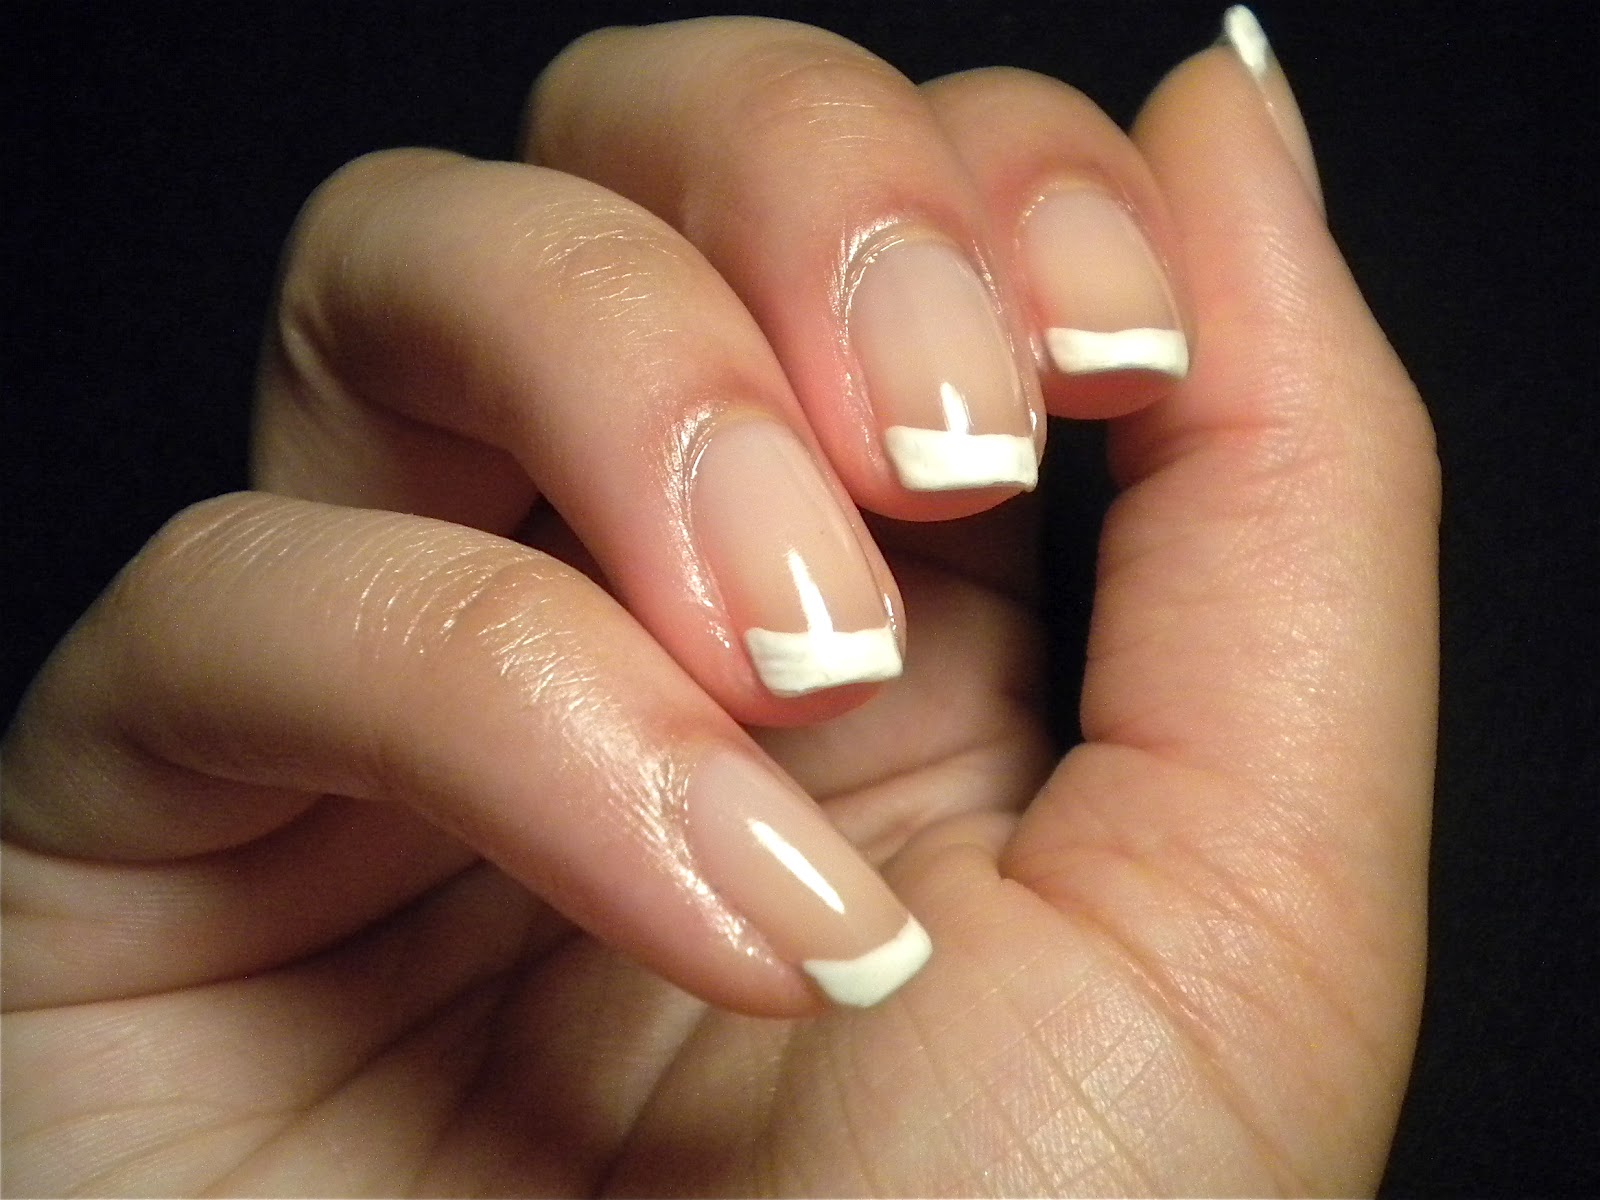 2. Elegant French Manicure Coffin Nails - wide 8